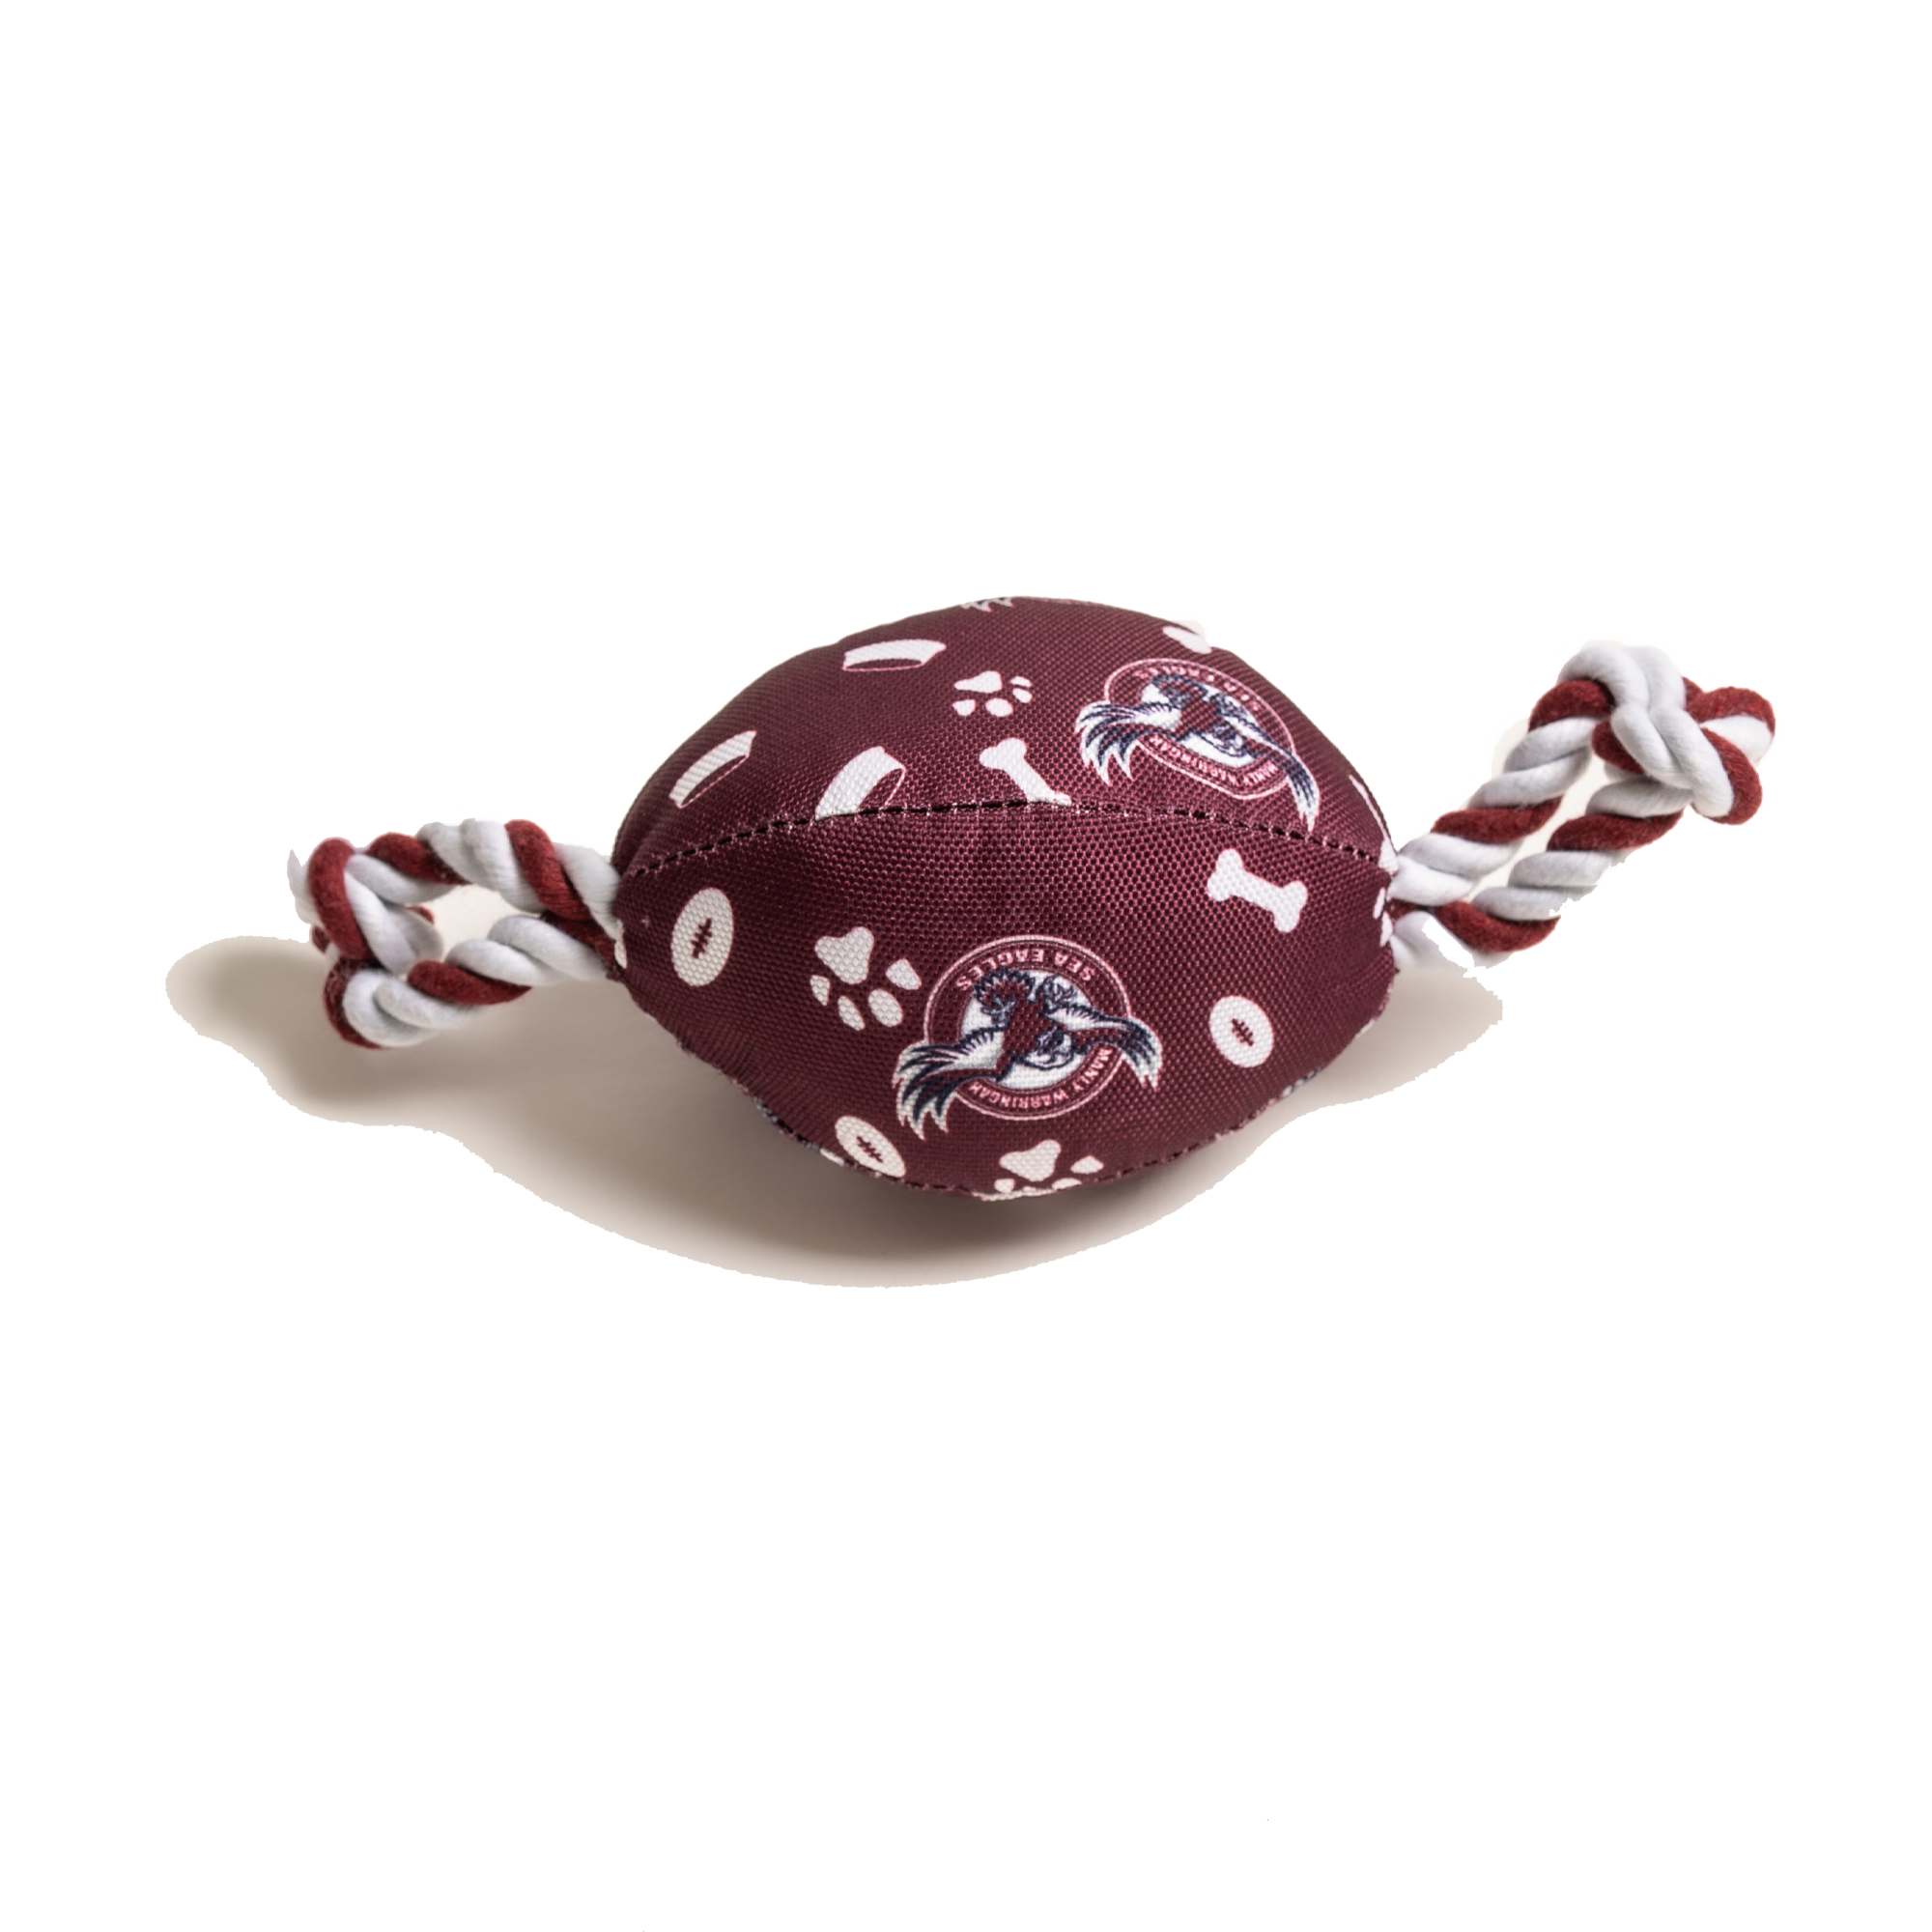 Manly Sea Eagles NRL Footy Chew Toy